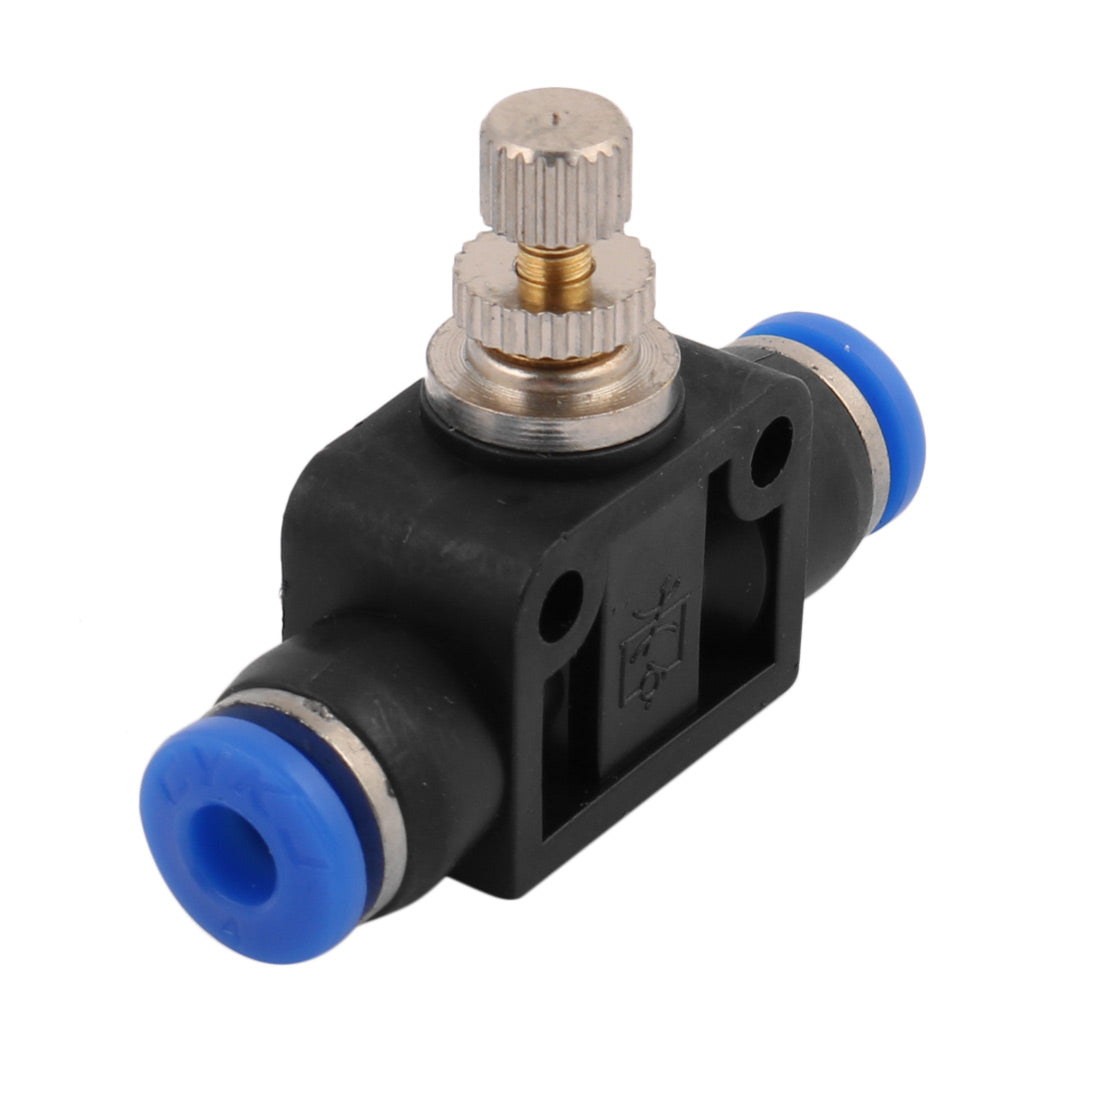 uxcell Uxcell Tube Speed Control Quick Connector Pneumatic Push In Fitting 4mm to 4mm Blue